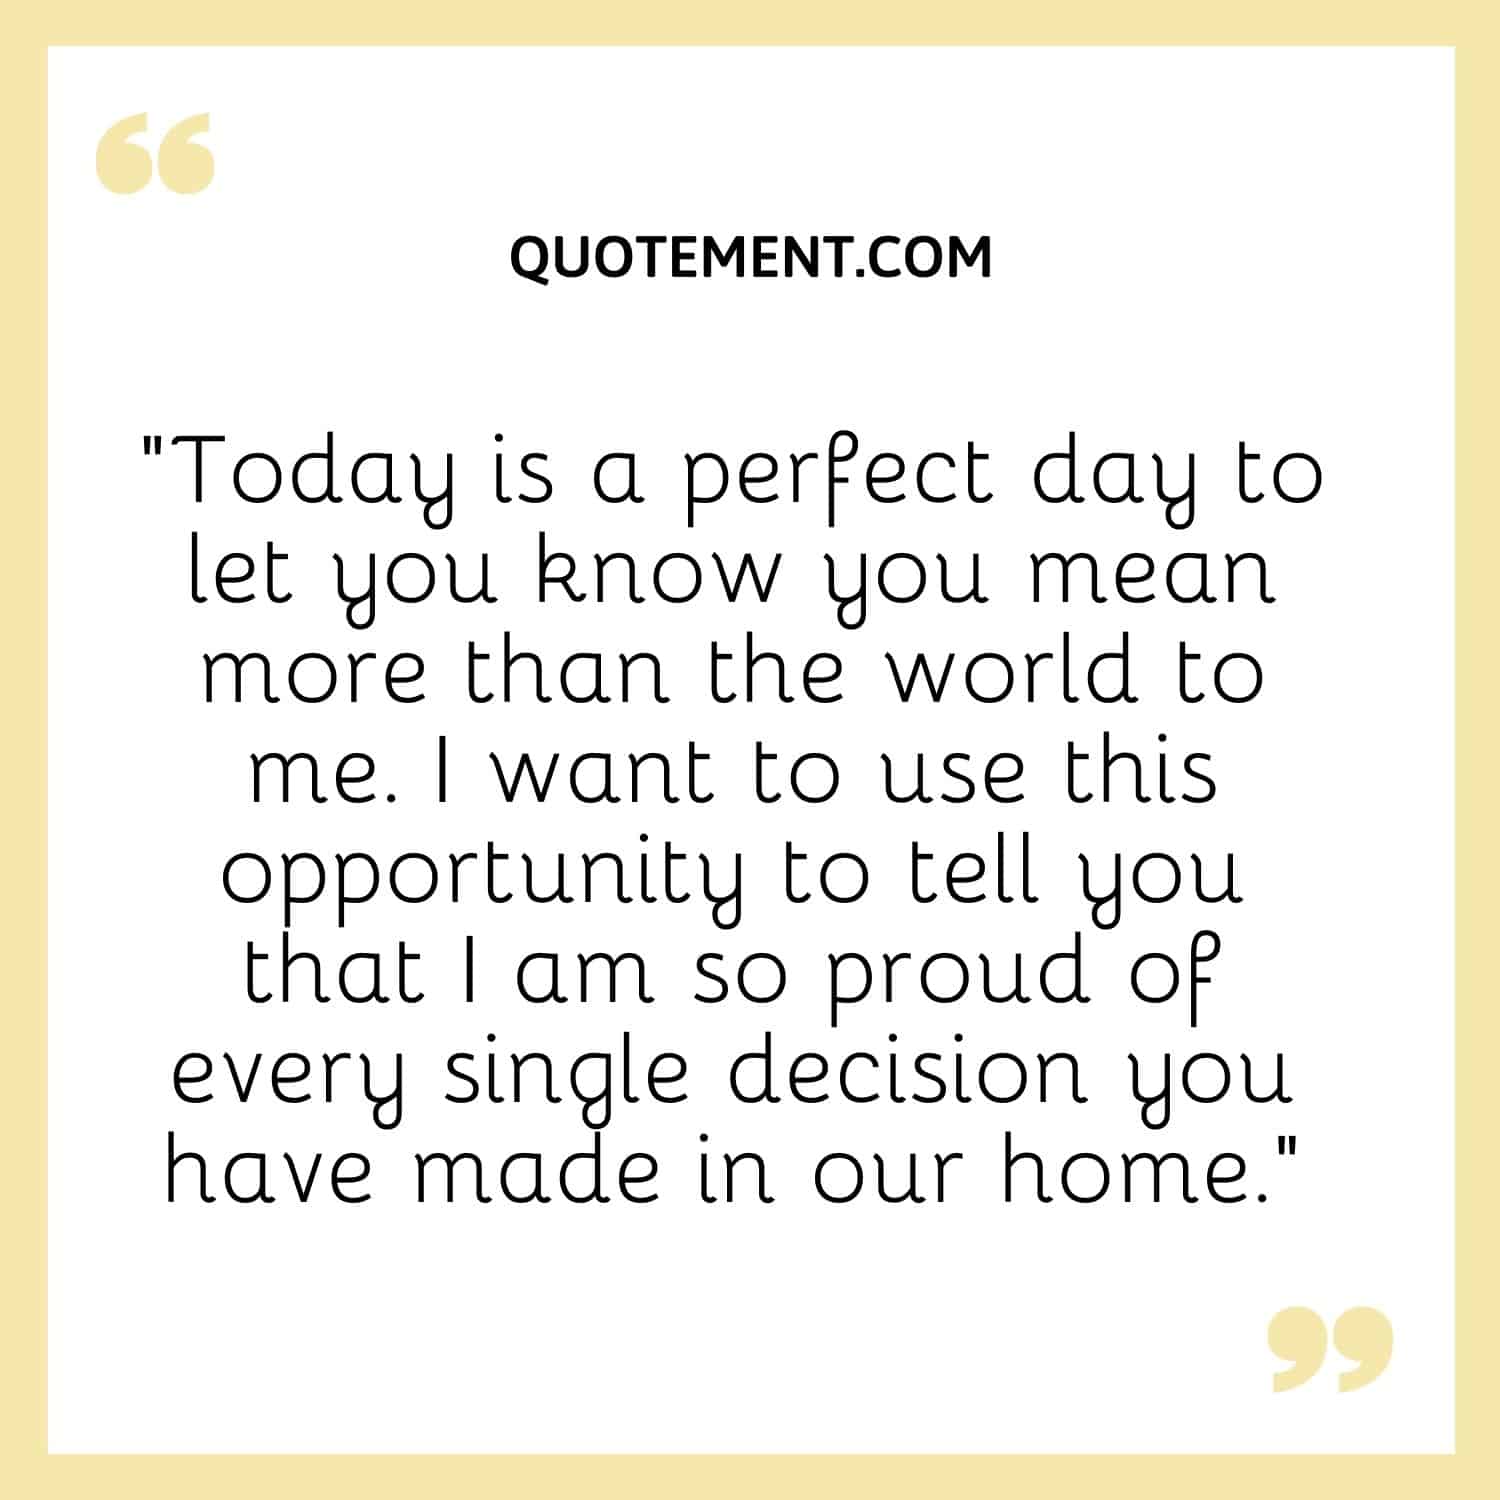 “Today is a perfect day to let you know you mean more than the world to me. I want to use this opportunity to tell you that I am so proud of every single decision you have made in our home.”